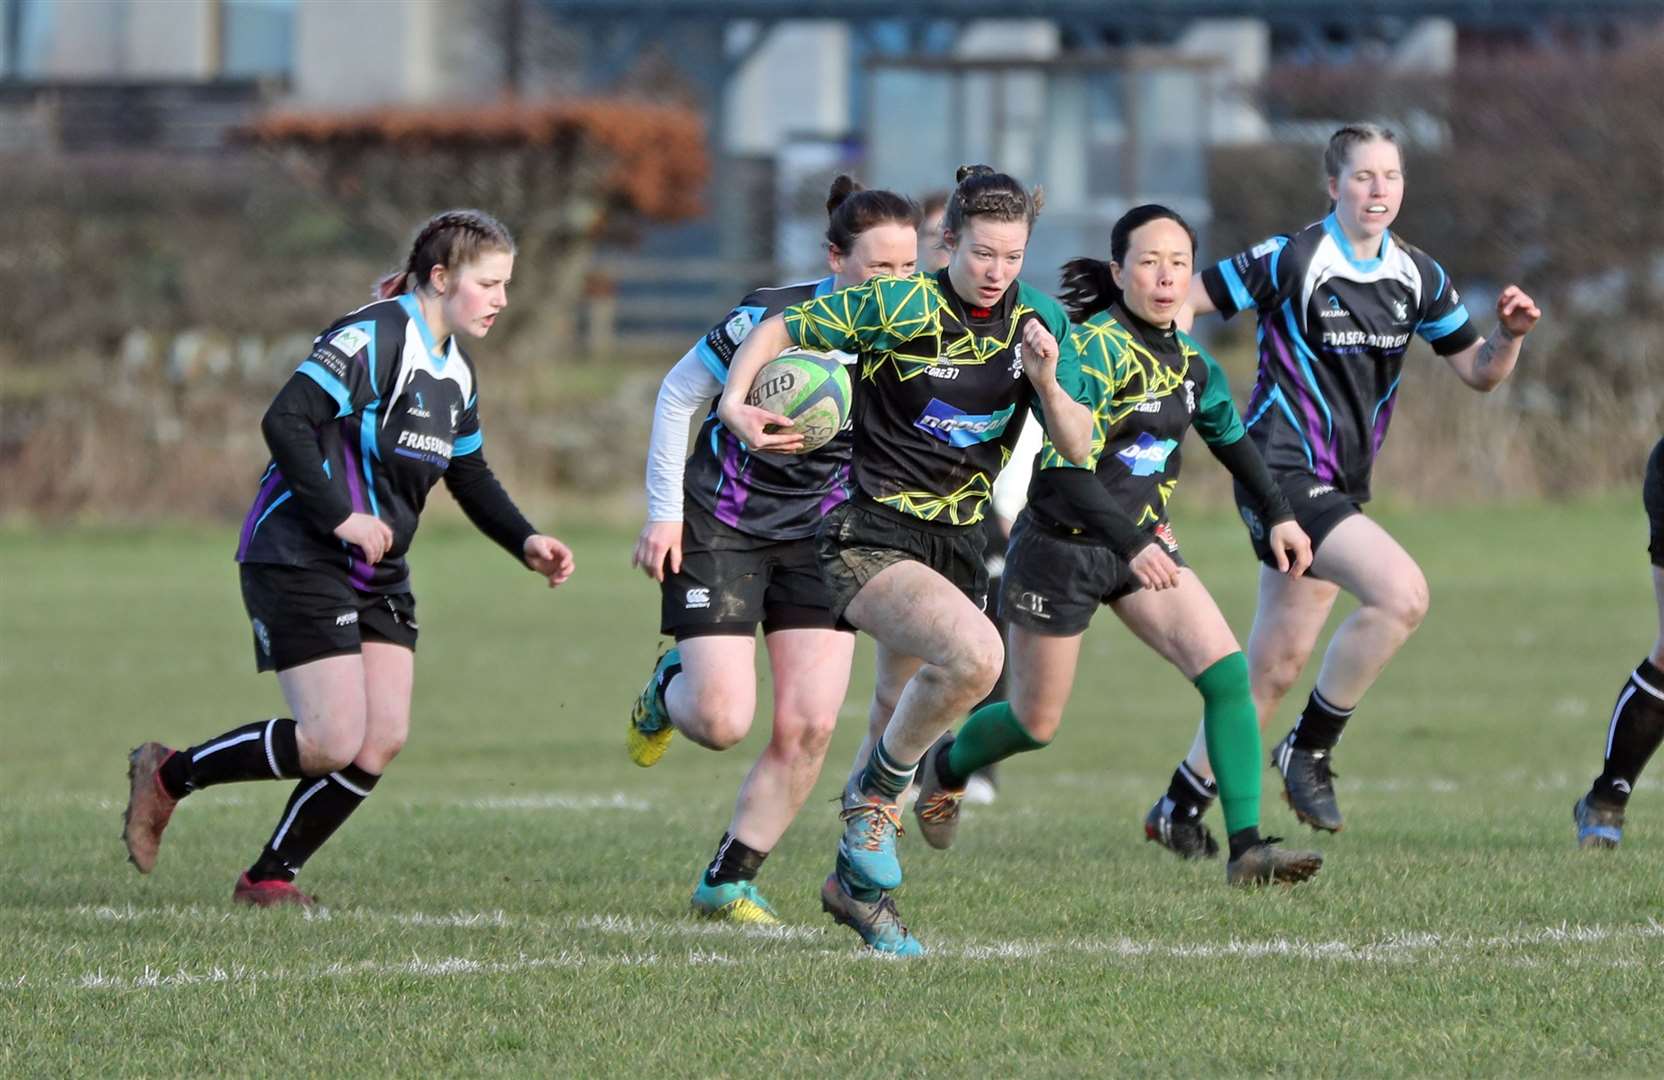 Caitlin Harvey breaks clear to score a try for the Krakens in their thumping victory over Fraserburgh in the Scottish Women's Bowl. Picture: James Gunn